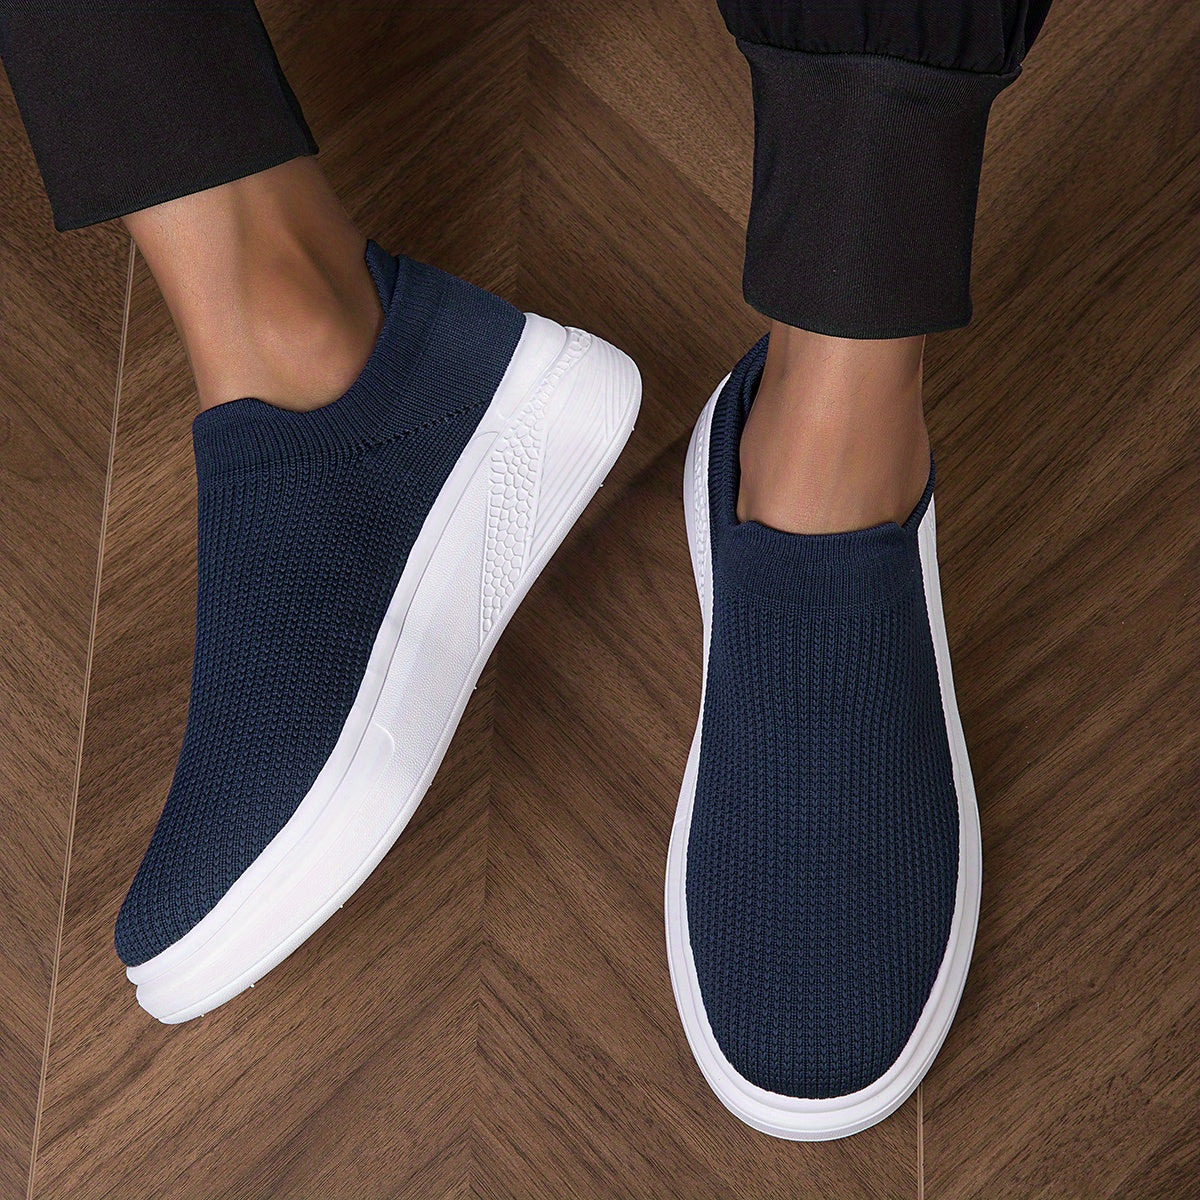 Men's Breathable Lightweight Slip-On Casual Shoes For Traveling Jogging, Spring And Summer